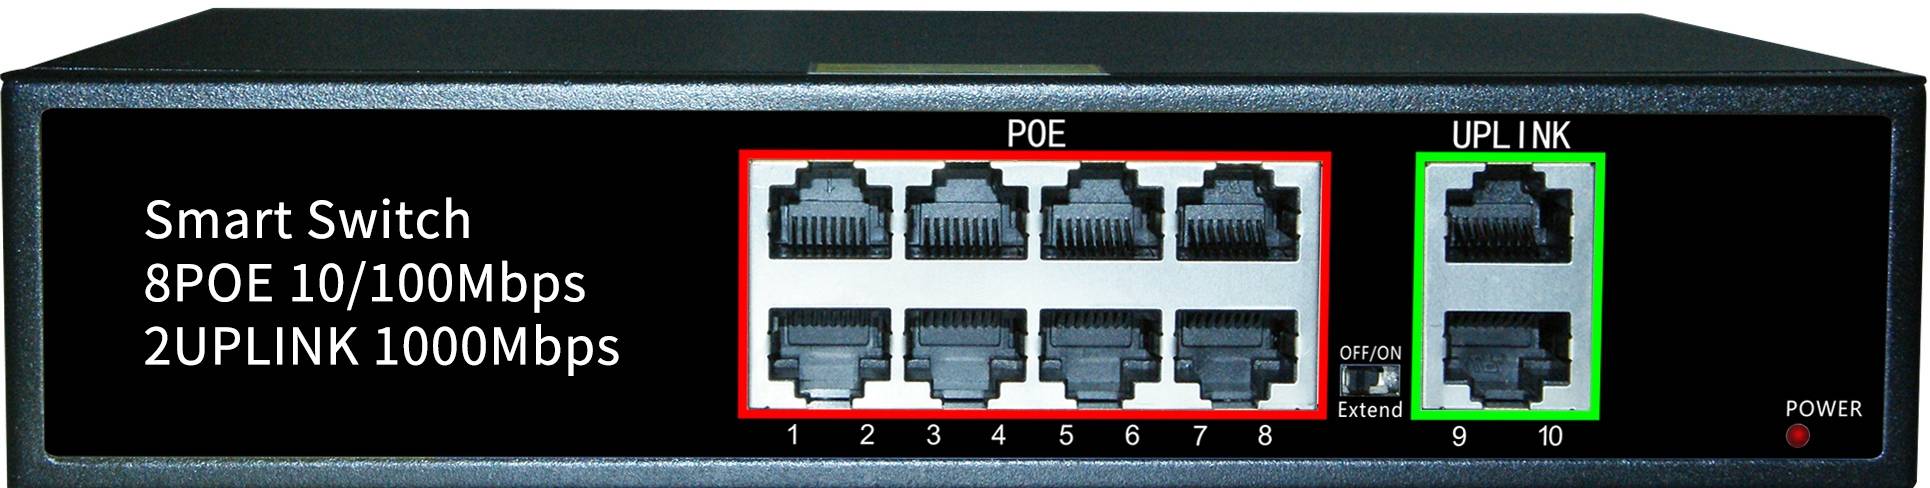 8-port poe switch product introduction